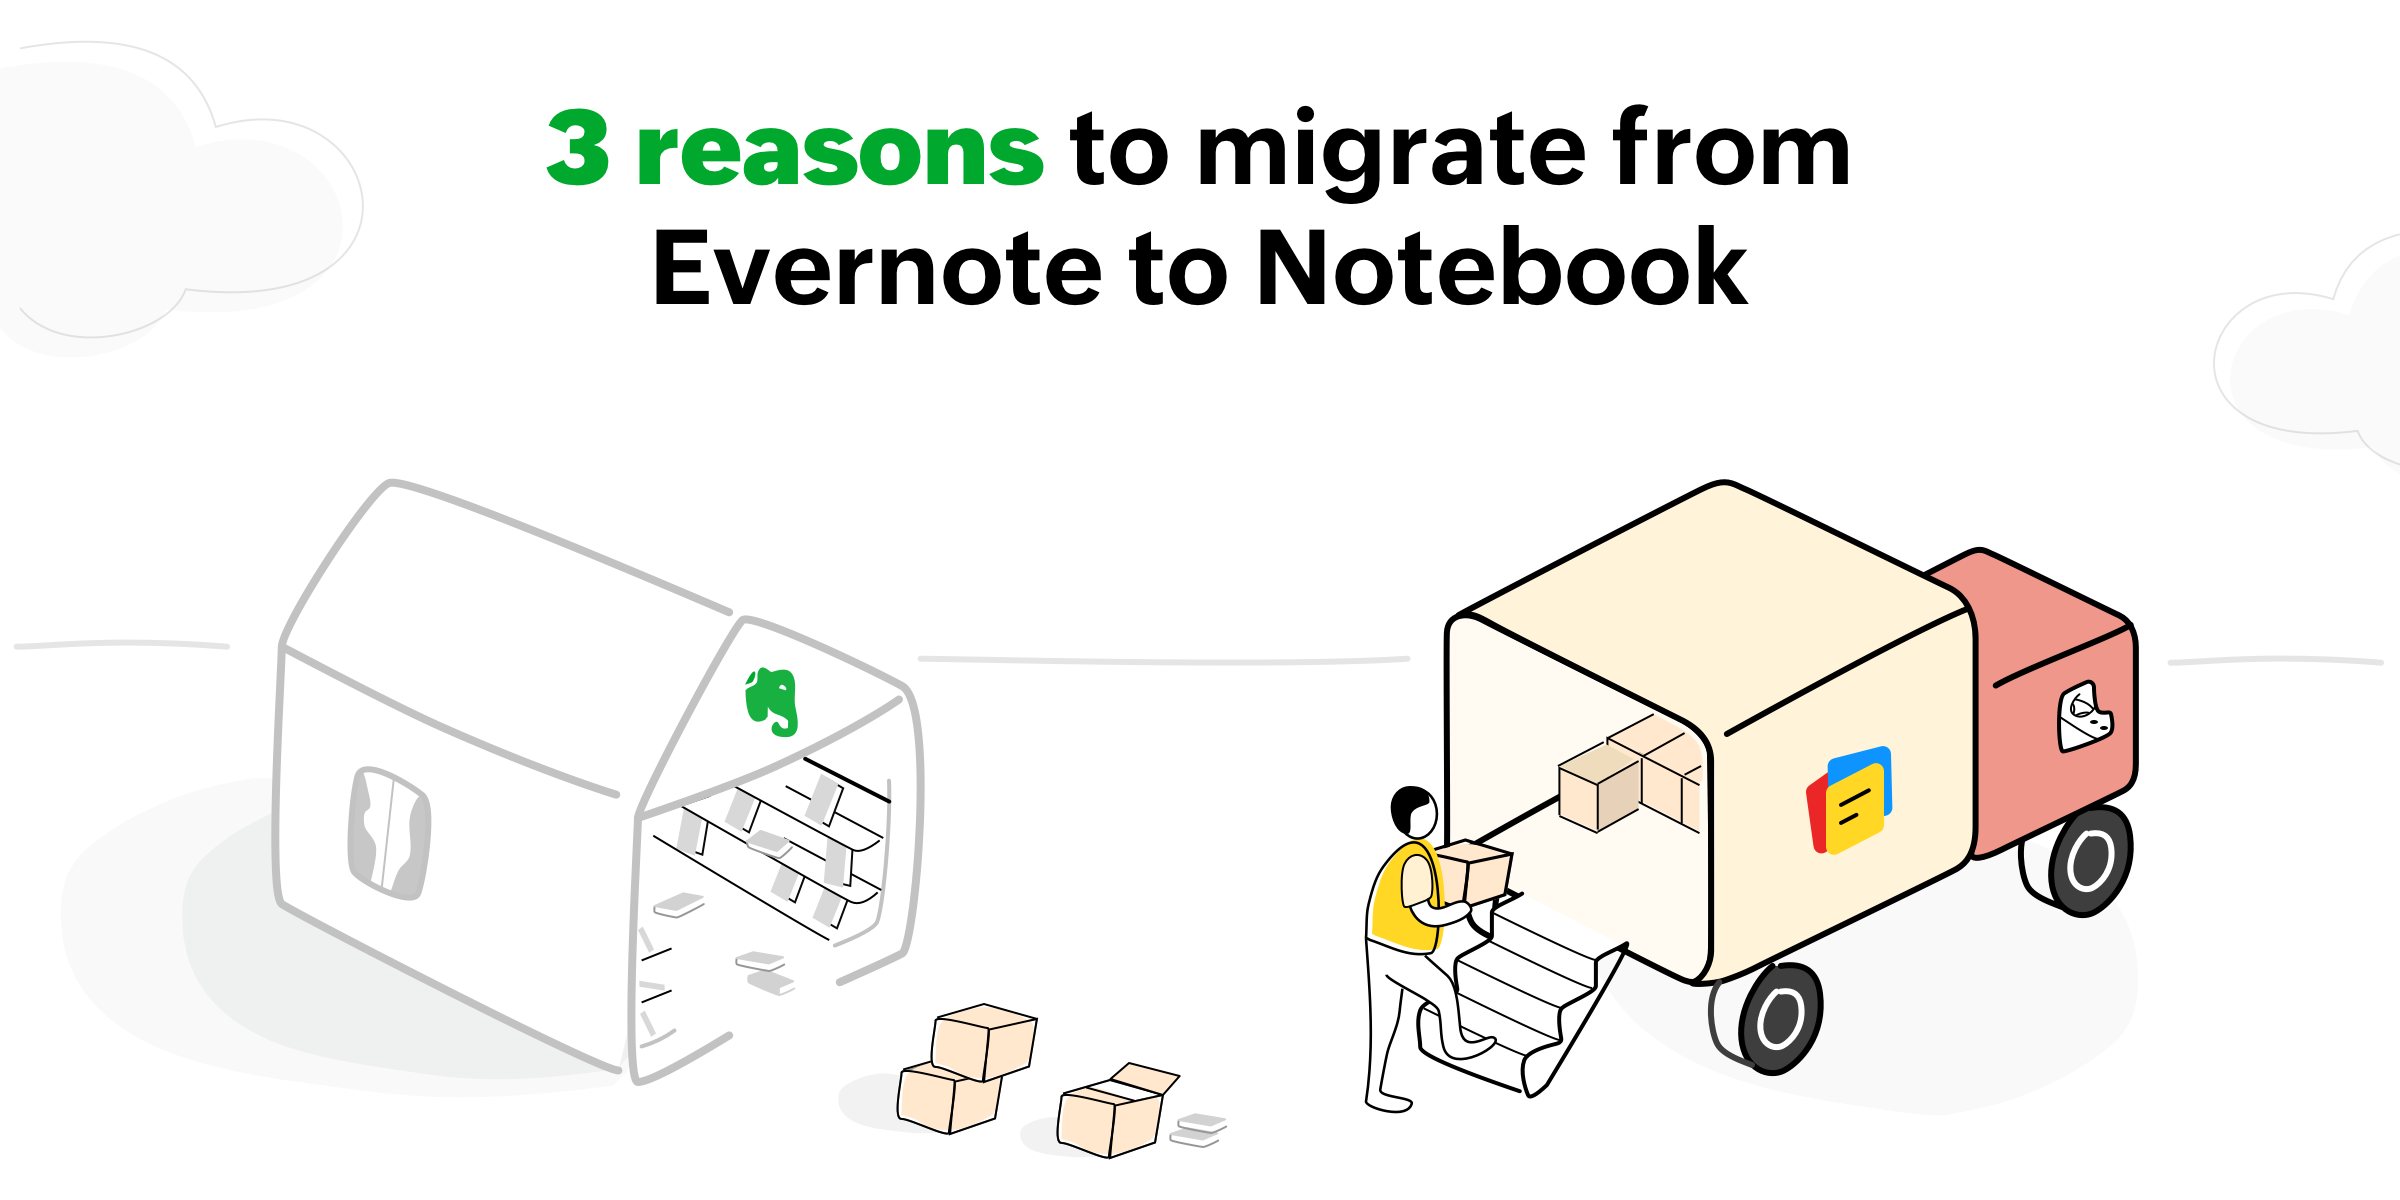 3 reasons to migrate from Evernote to Zoho Notebook